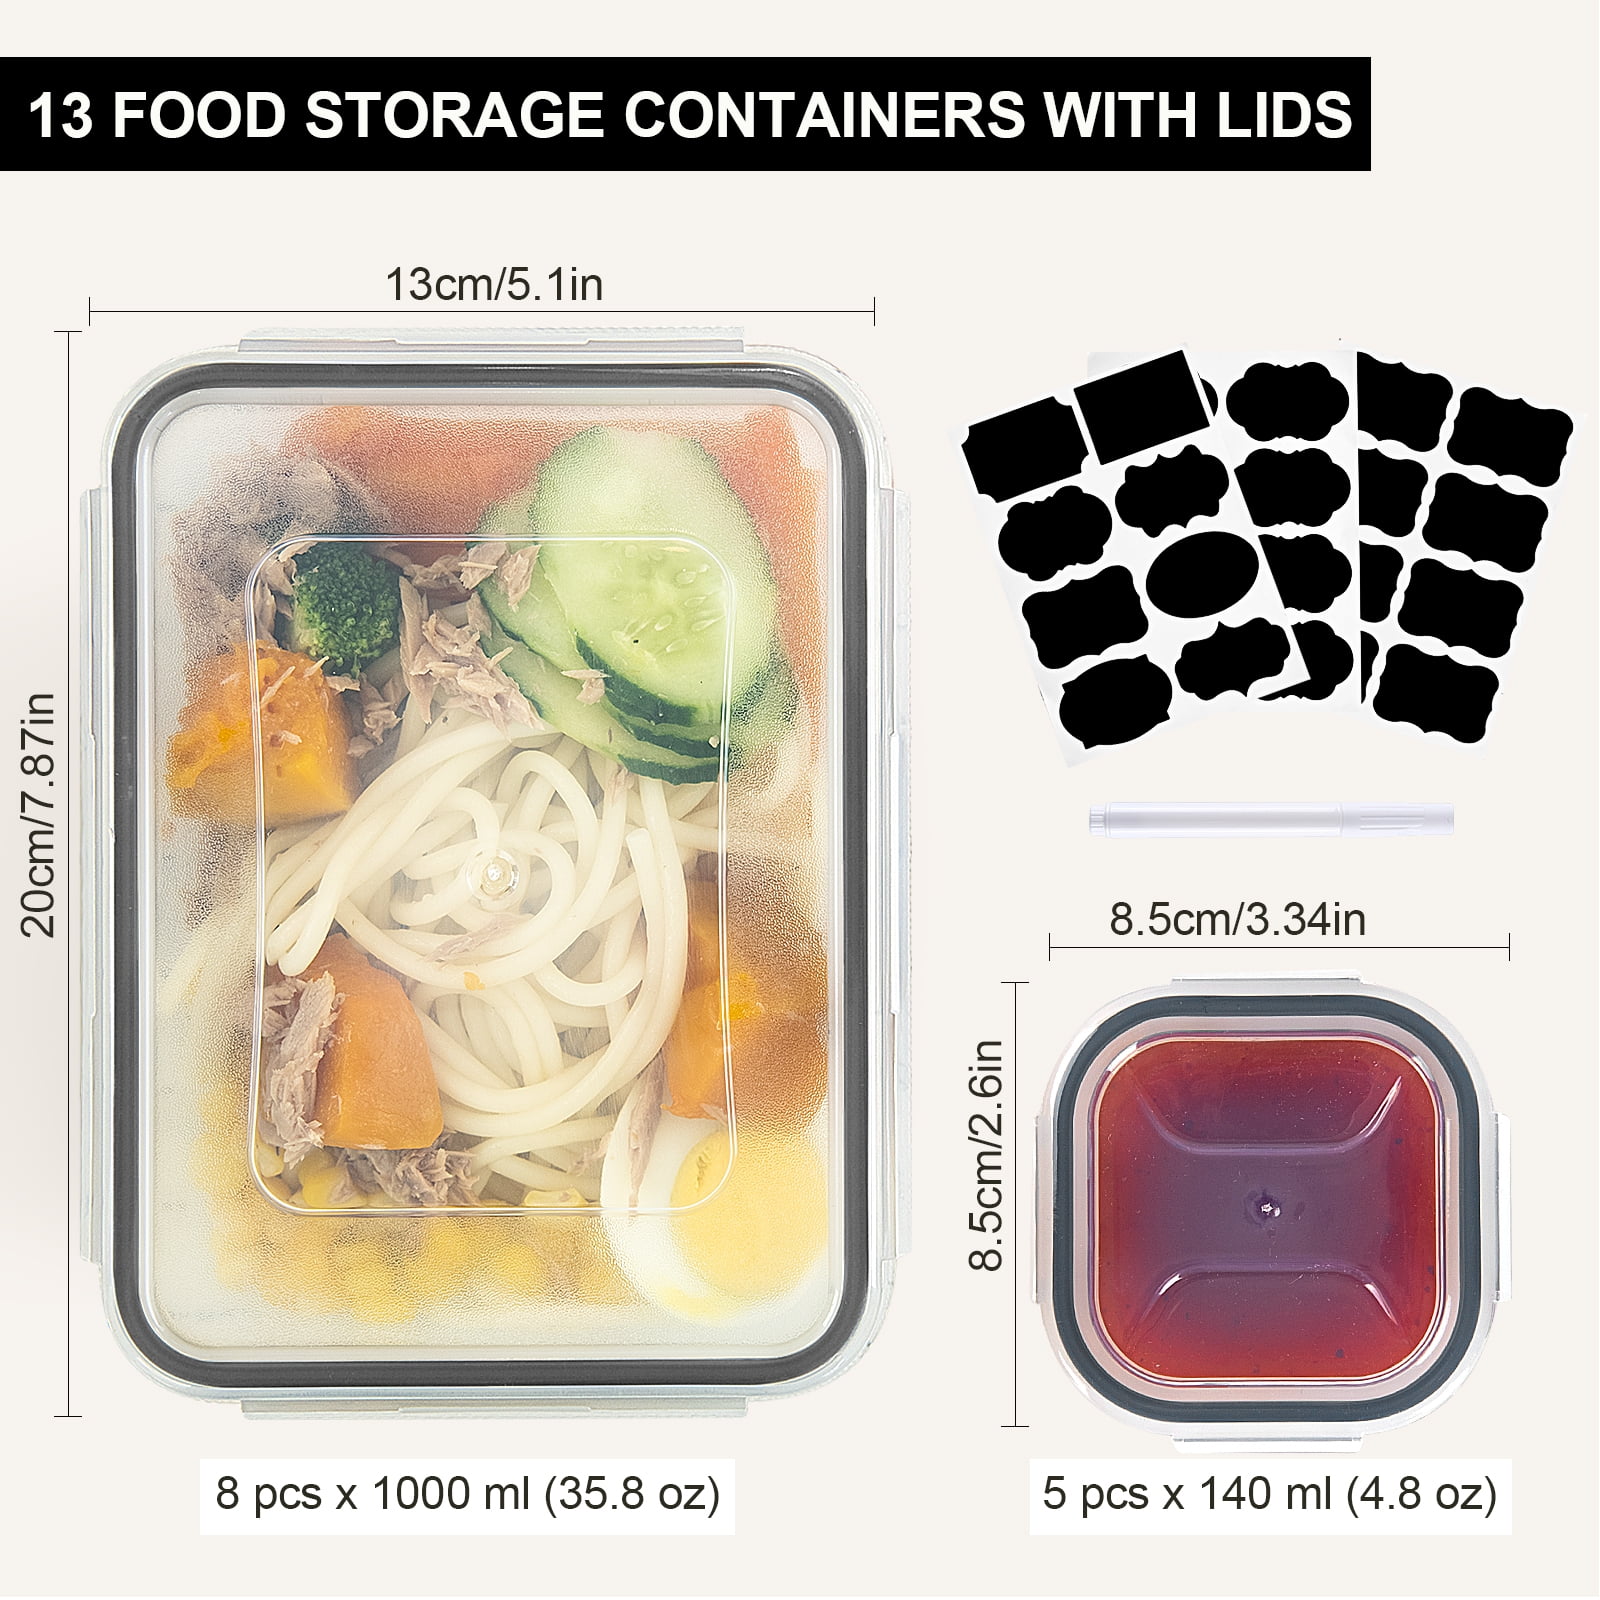 Futura 63 Ounce Meal Prep Containers with Lids, 100 Tamper-Evident to Go Containers - Microwavable, Disposable, Silver Plastic Food Containers with Li